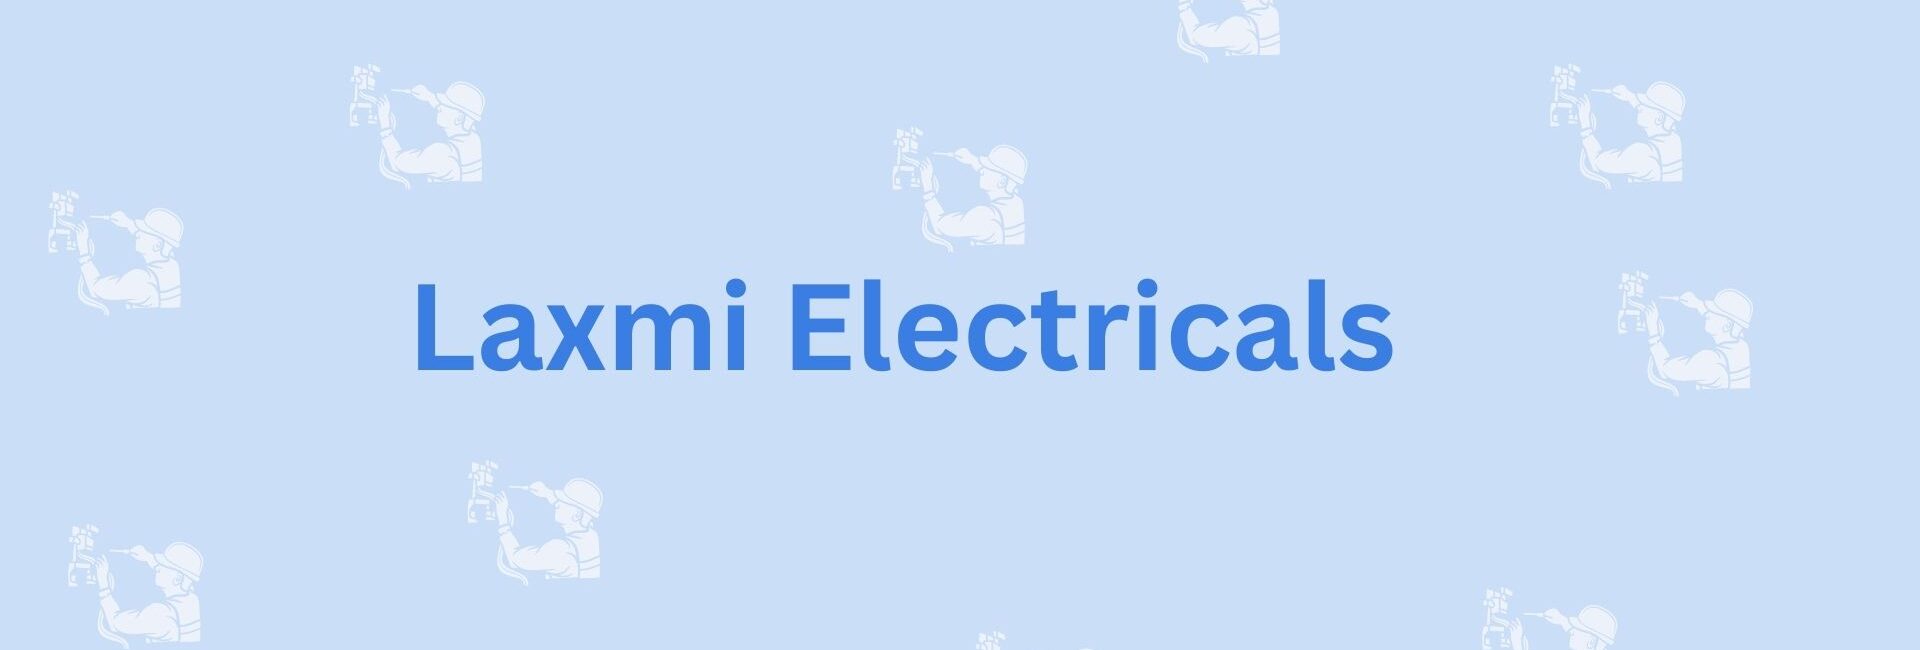 Laxmi Electricals- Electricity Repair Services In Noida